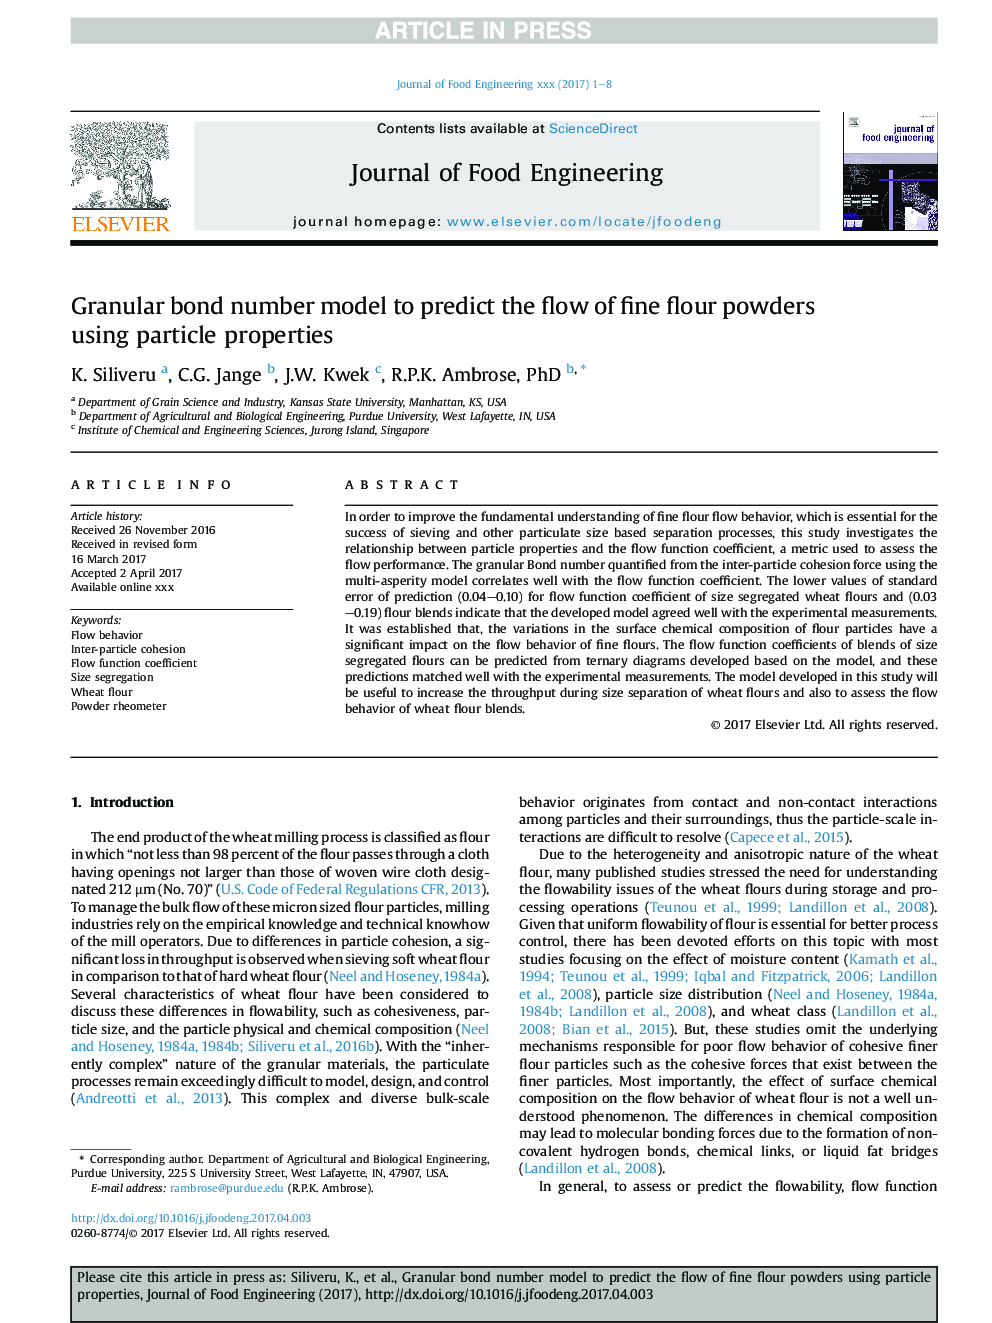 Granular bond number model to predict the flow of fine flour powders using particle properties